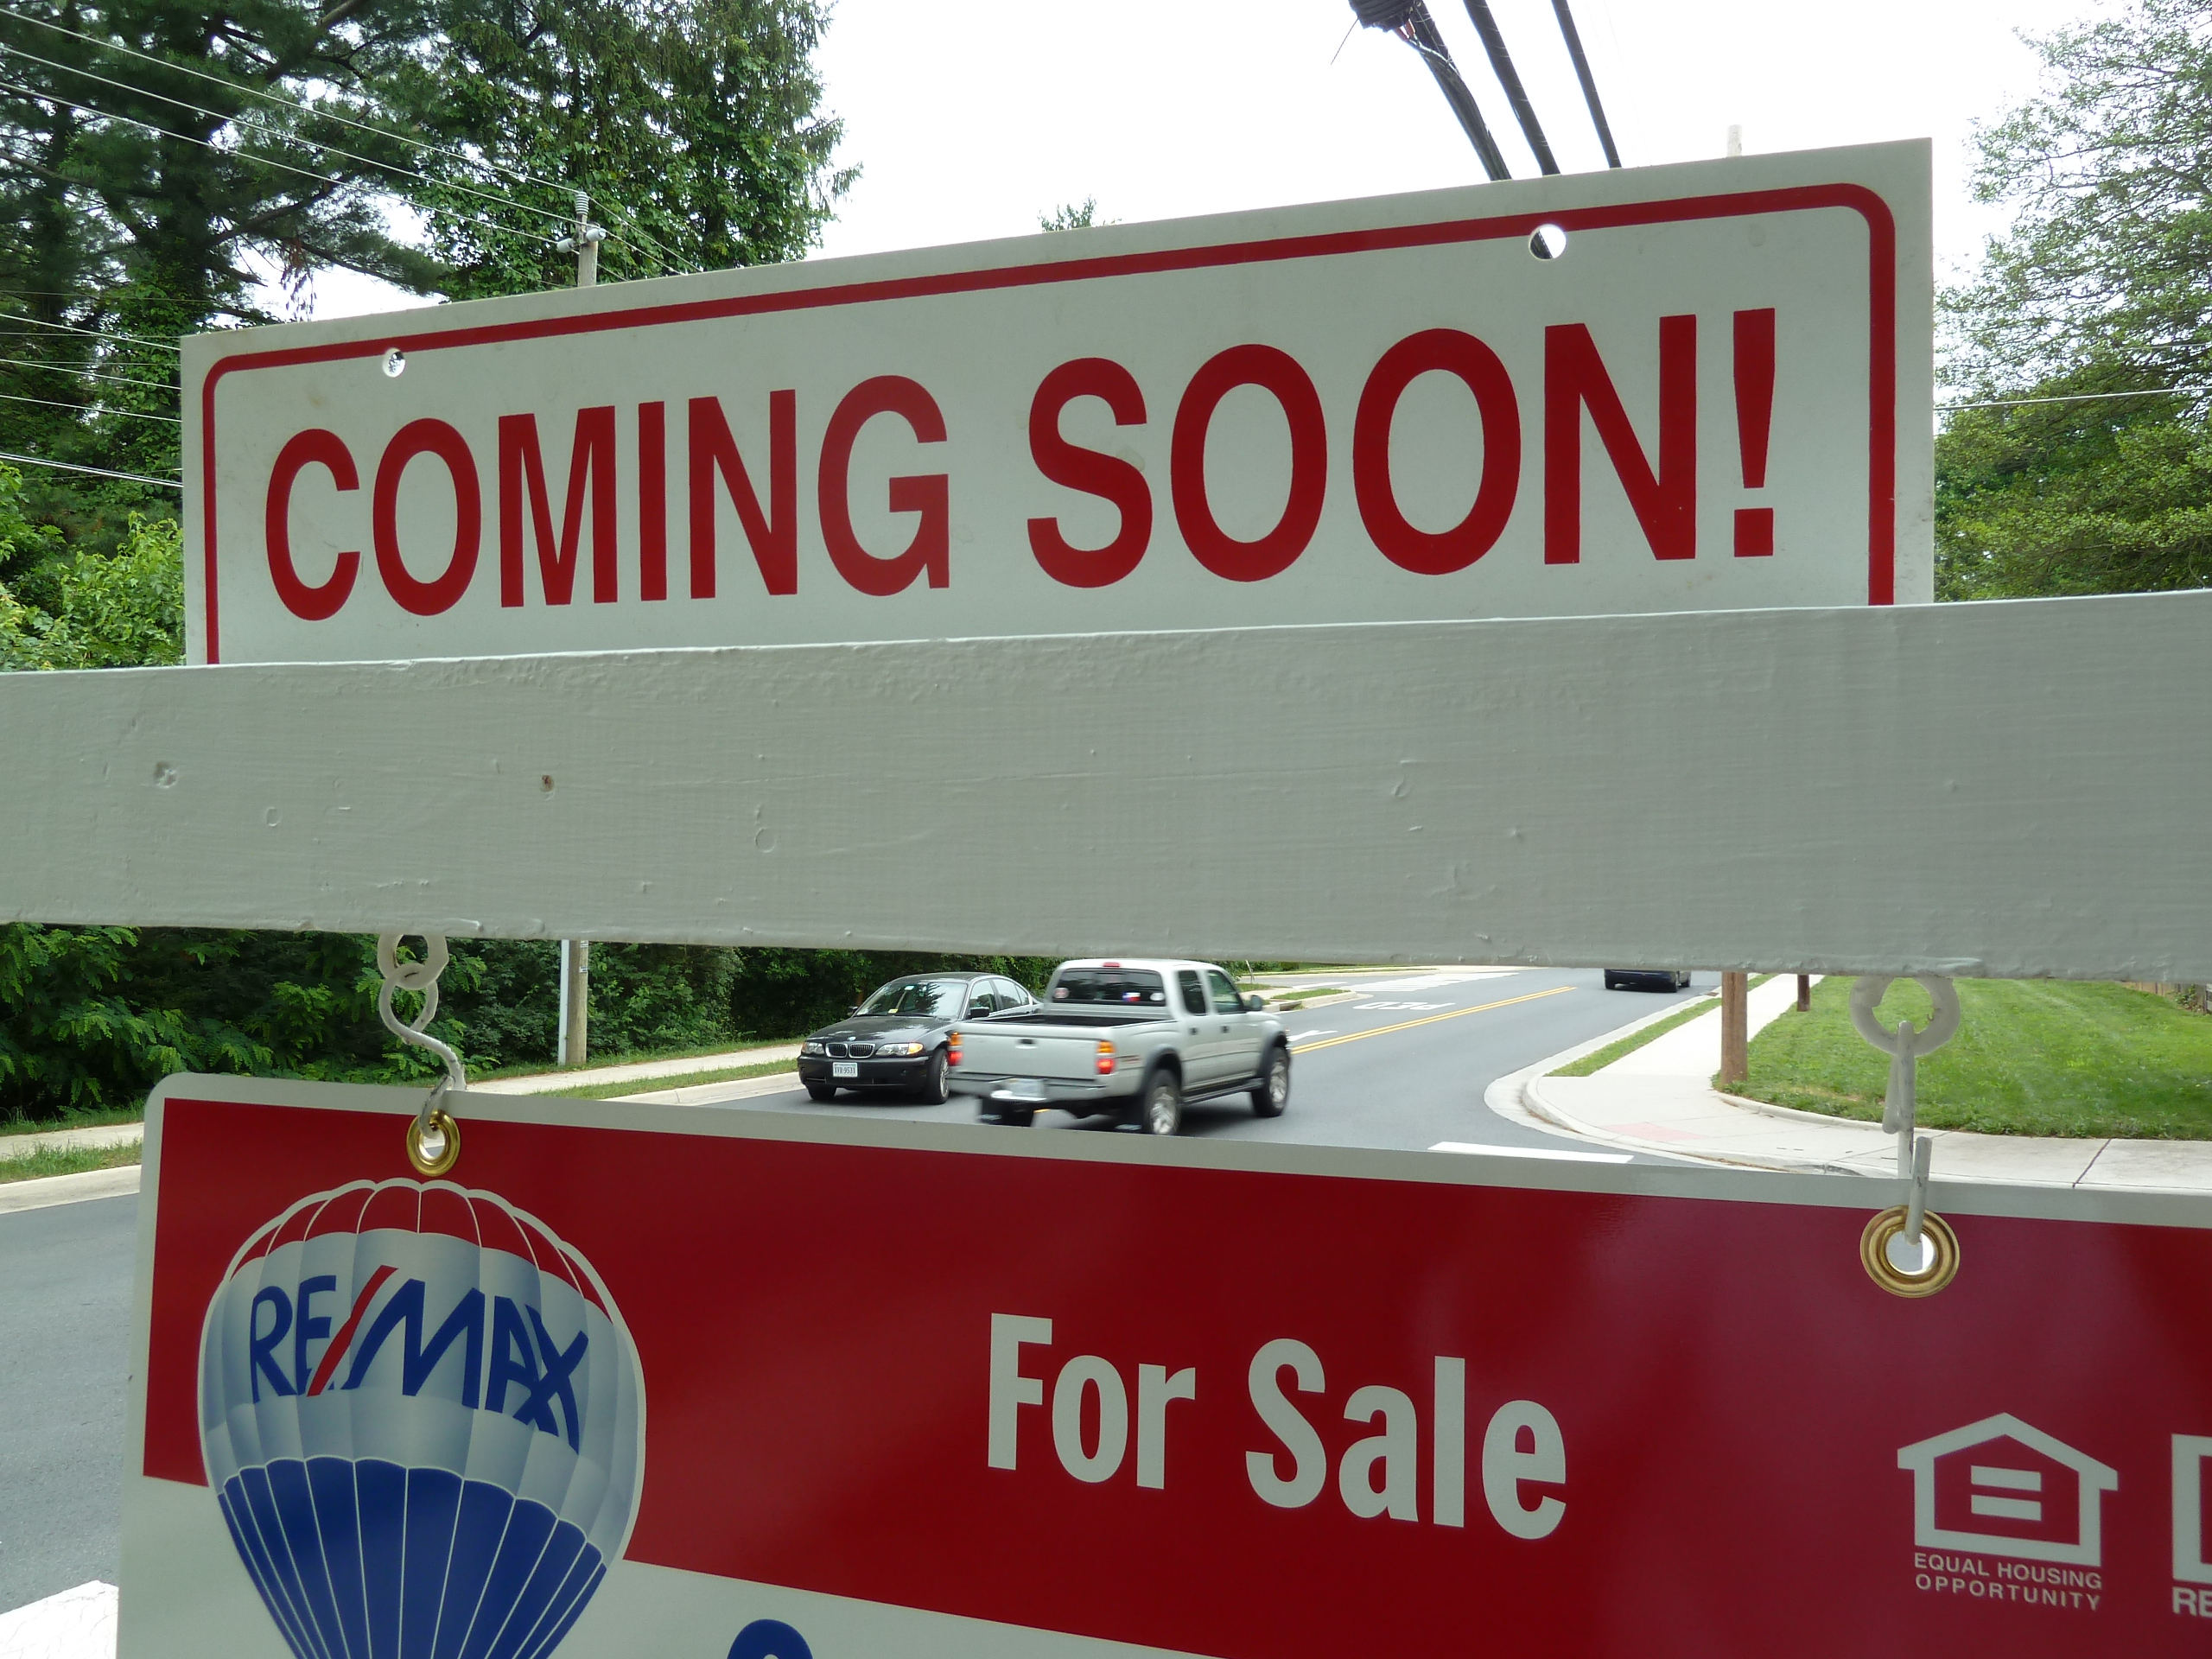 Home Selling Tips: The "Coming Soon" Sign